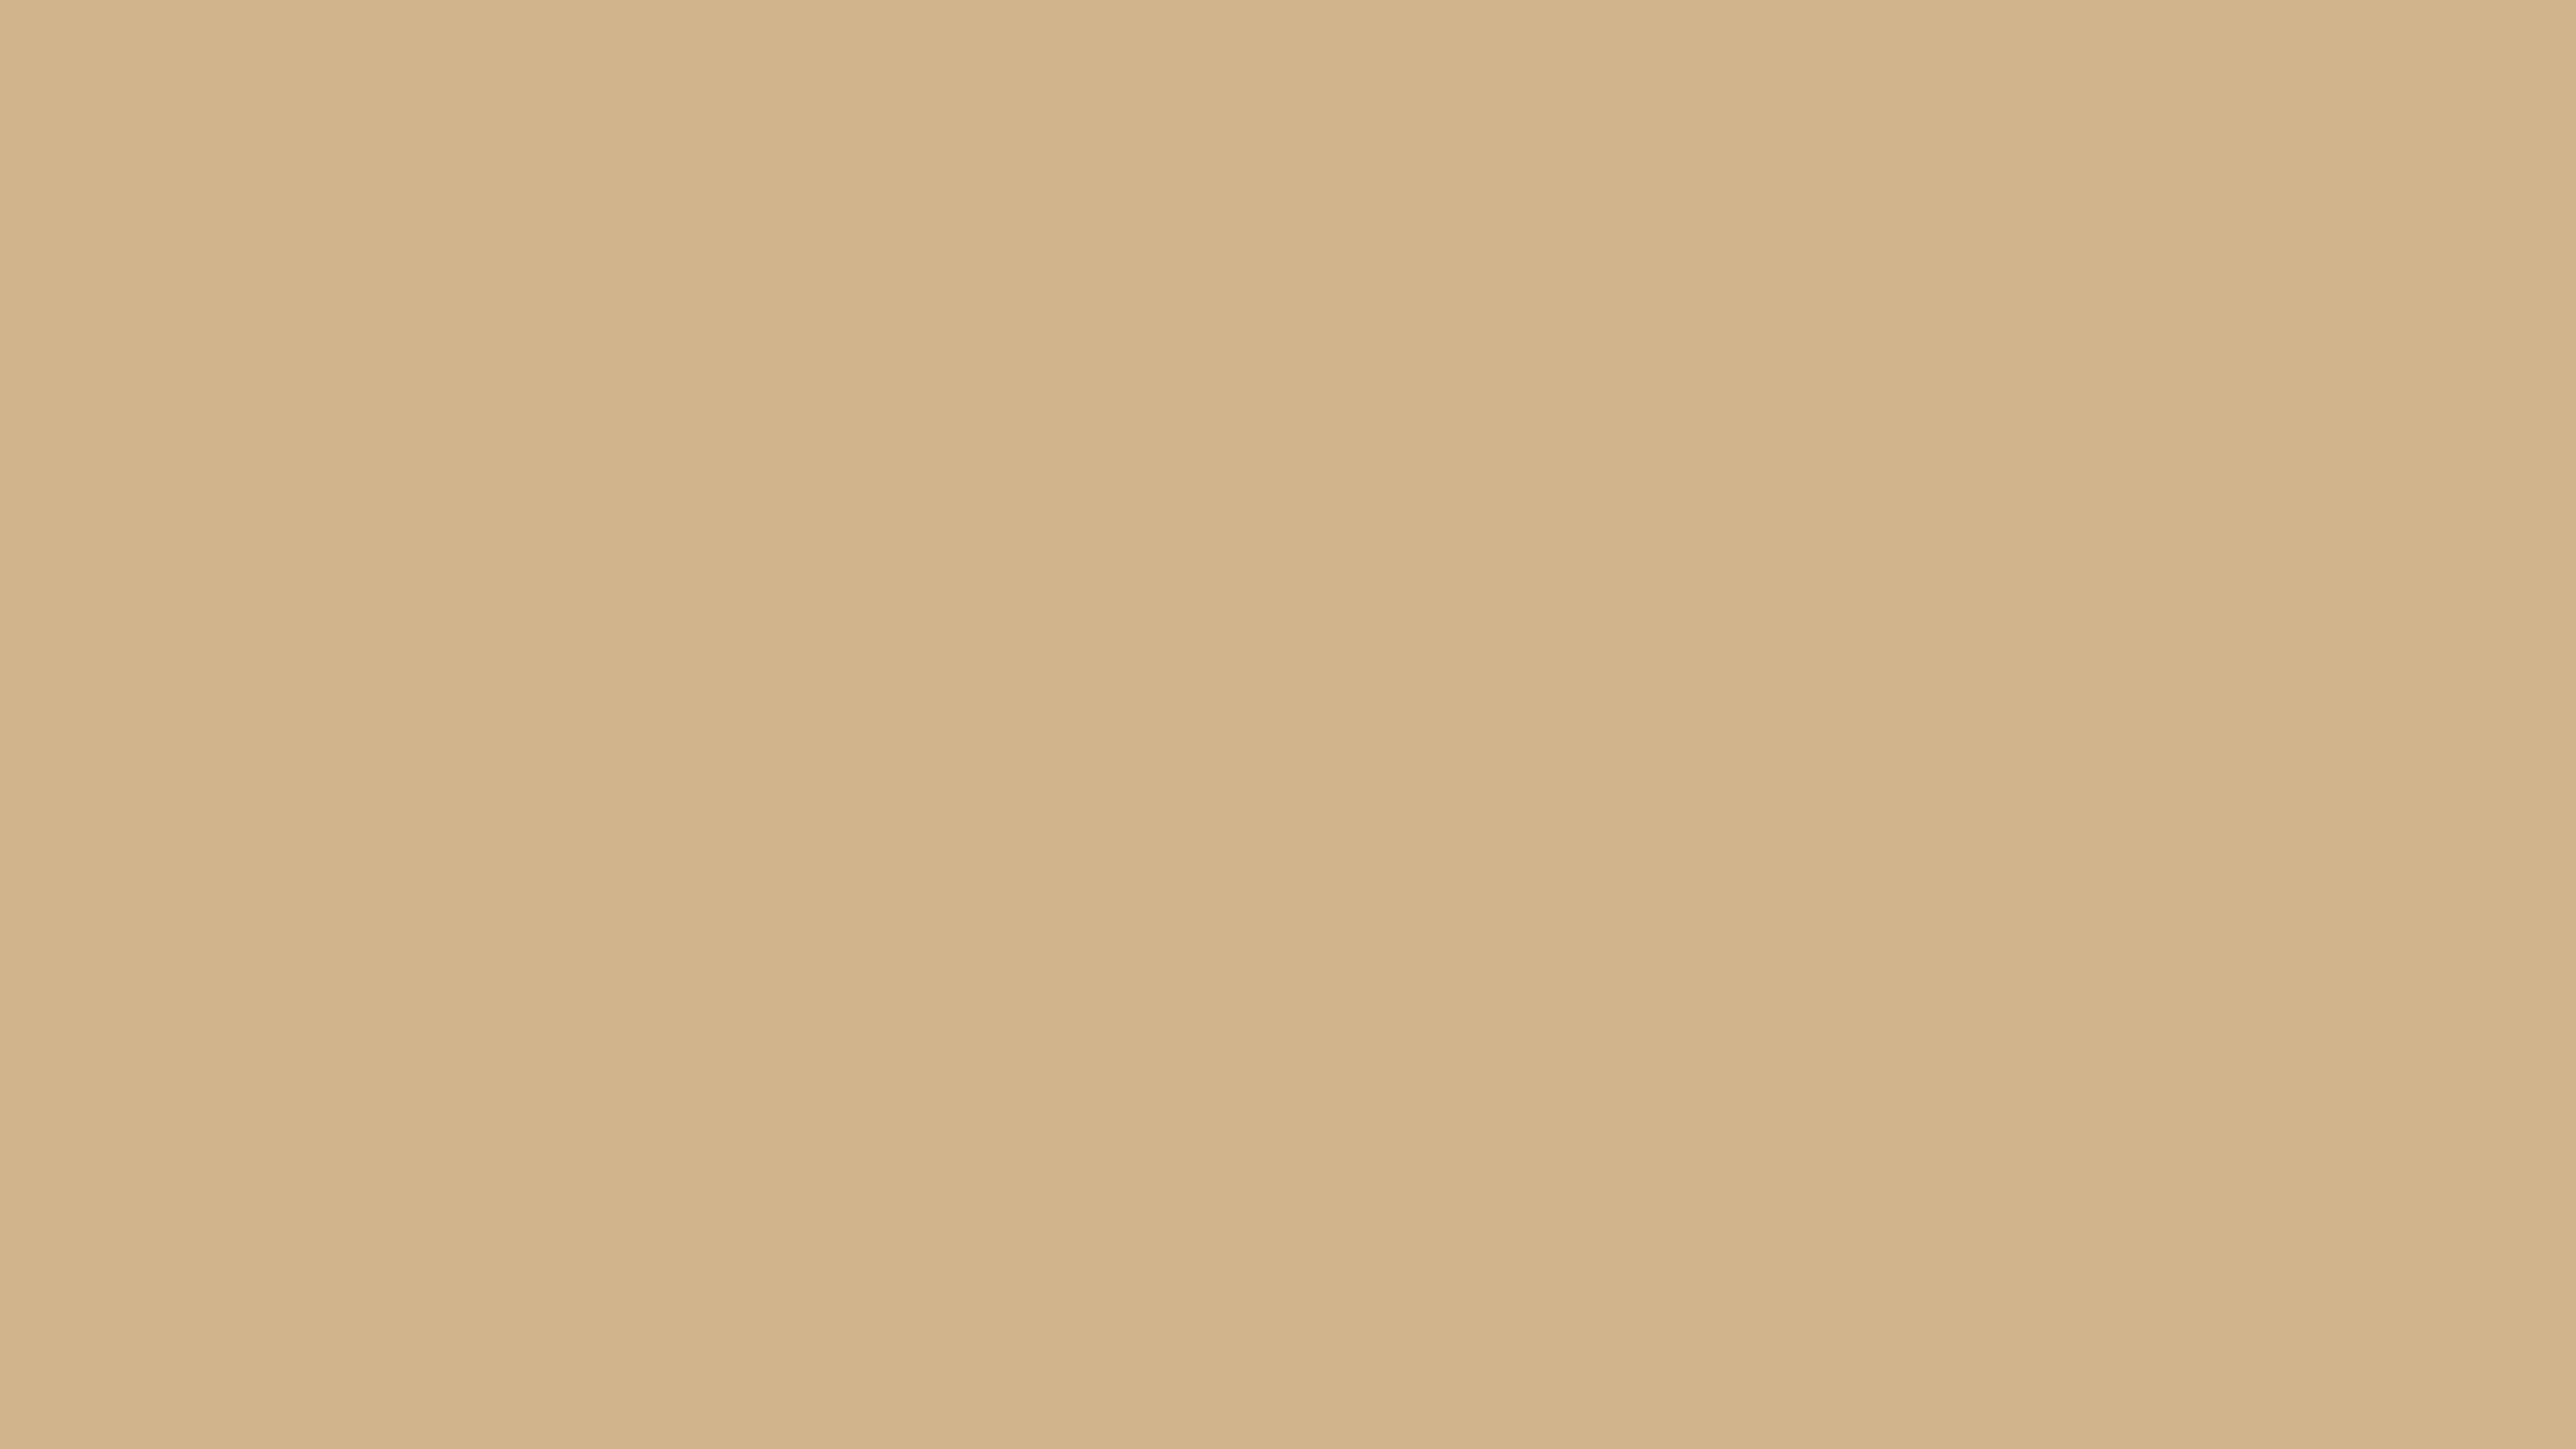 5120x2880 Tan Solid Color Background